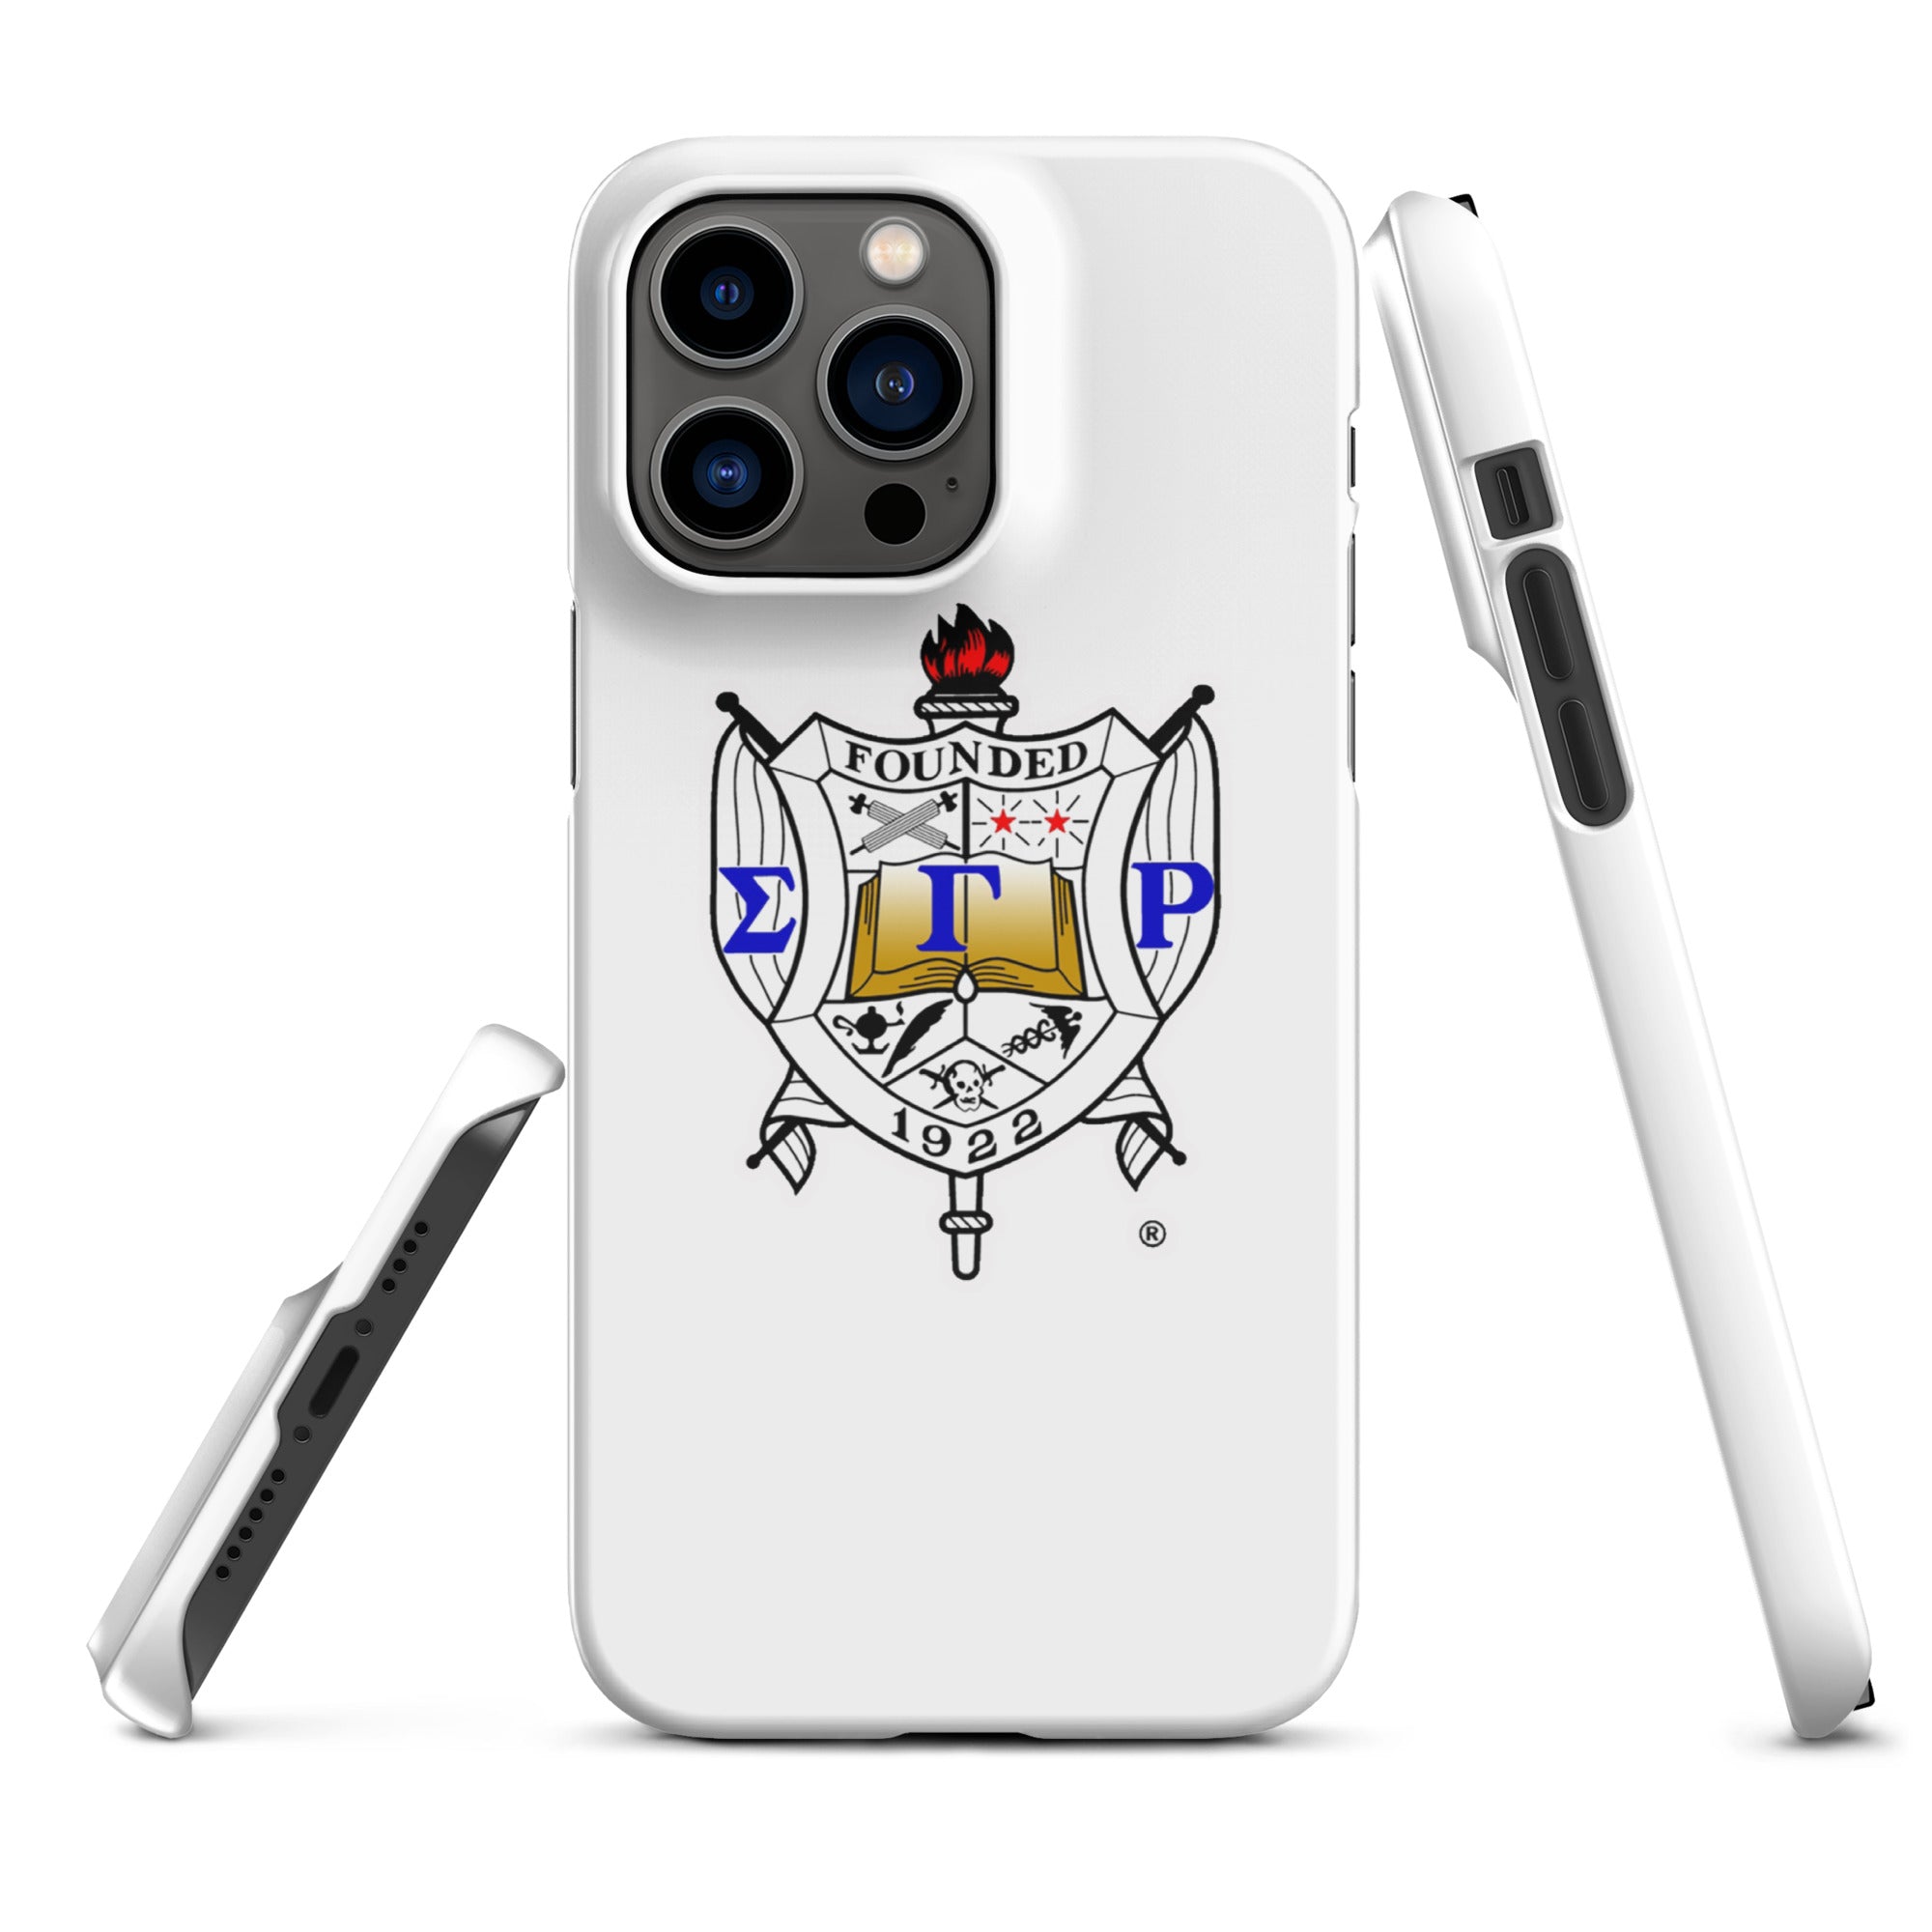 Sigma Gamma Rho Snap case for iPhone®